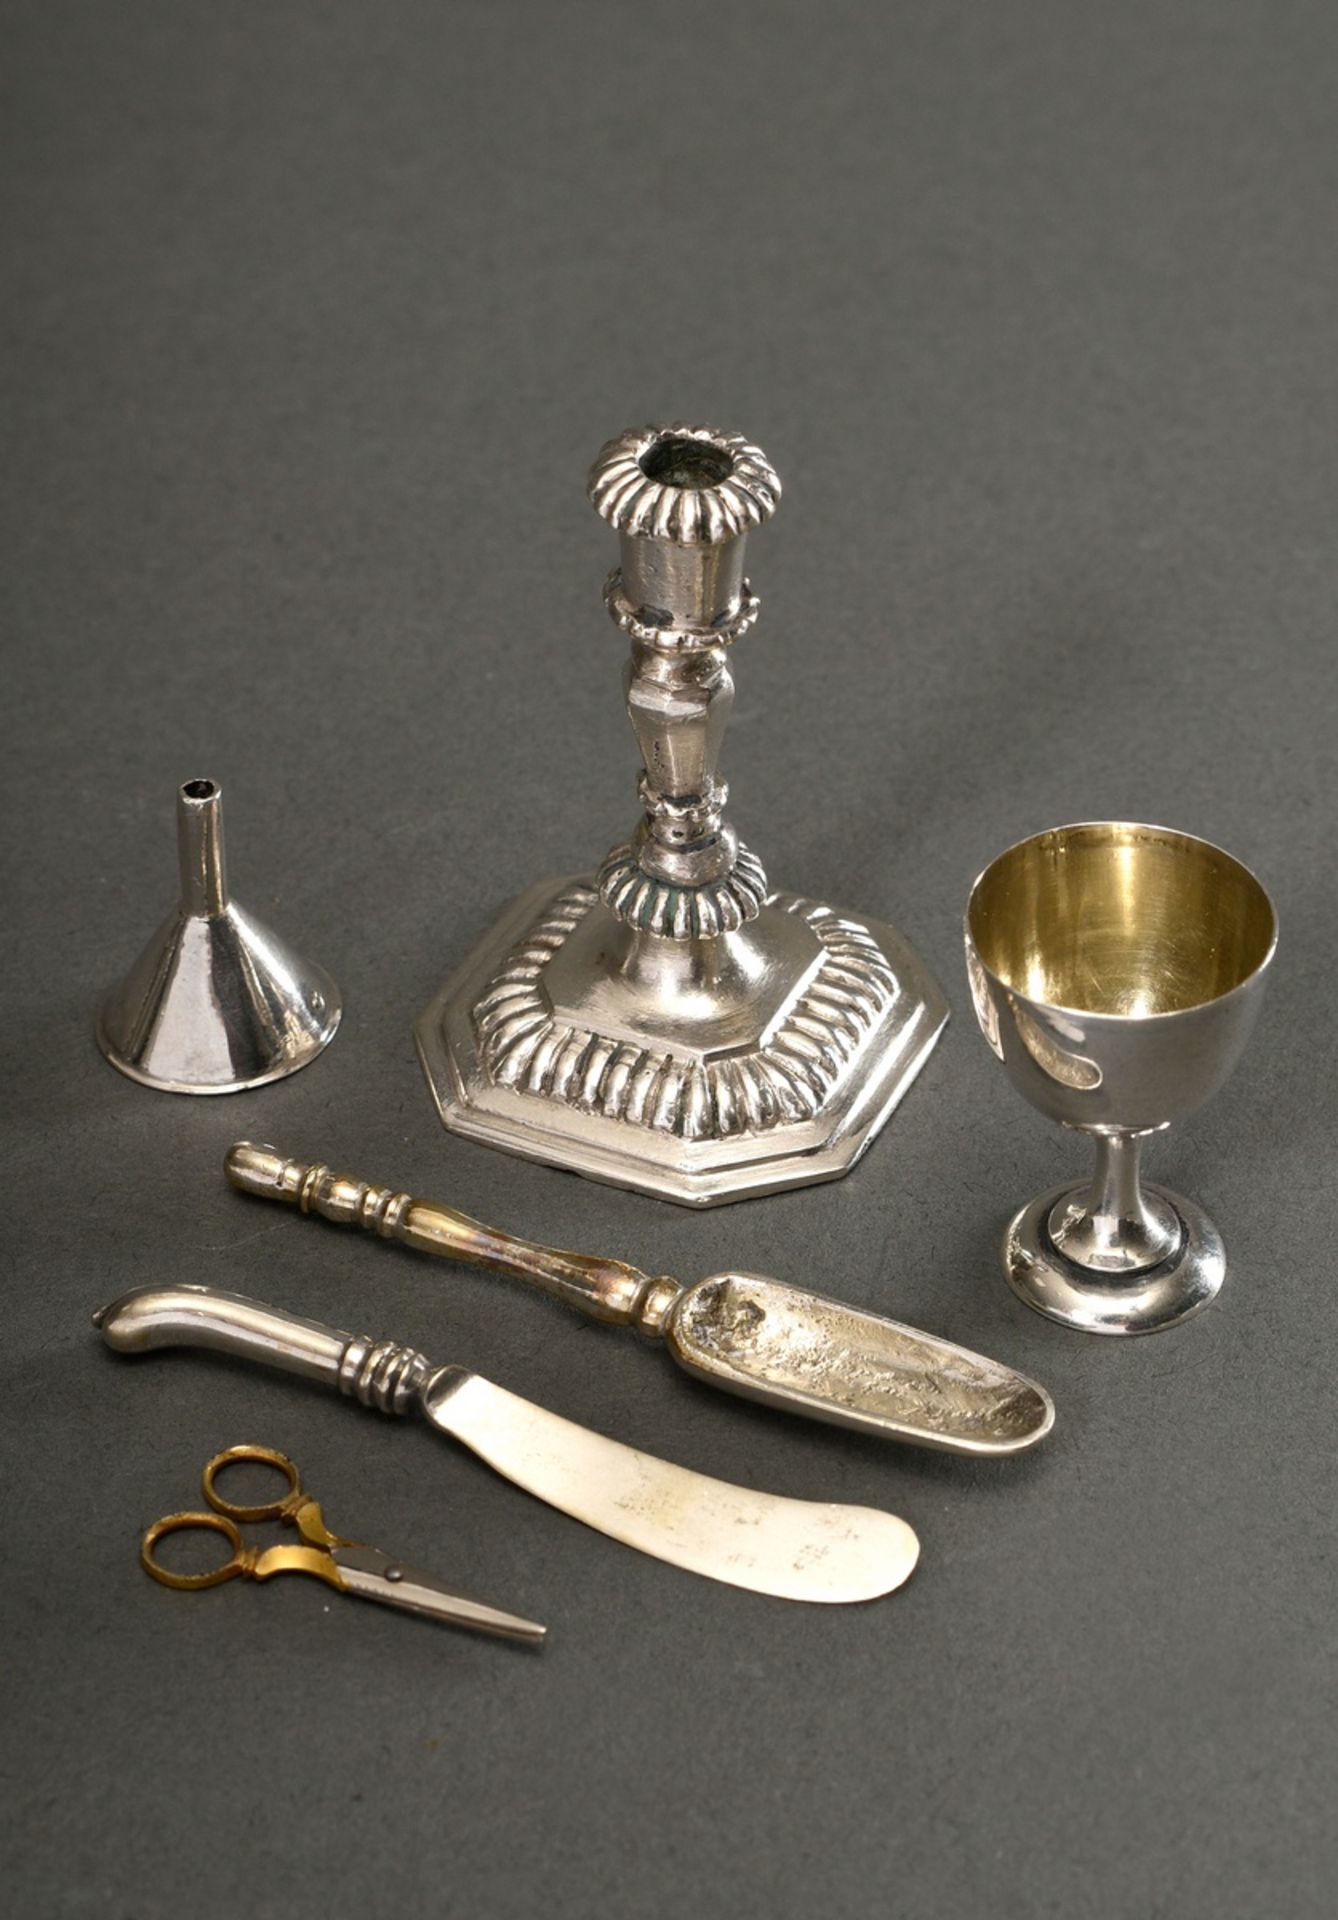 6 Various parts doll's house miniatures: Régence candlestick with grooved decoration, knife, marrow